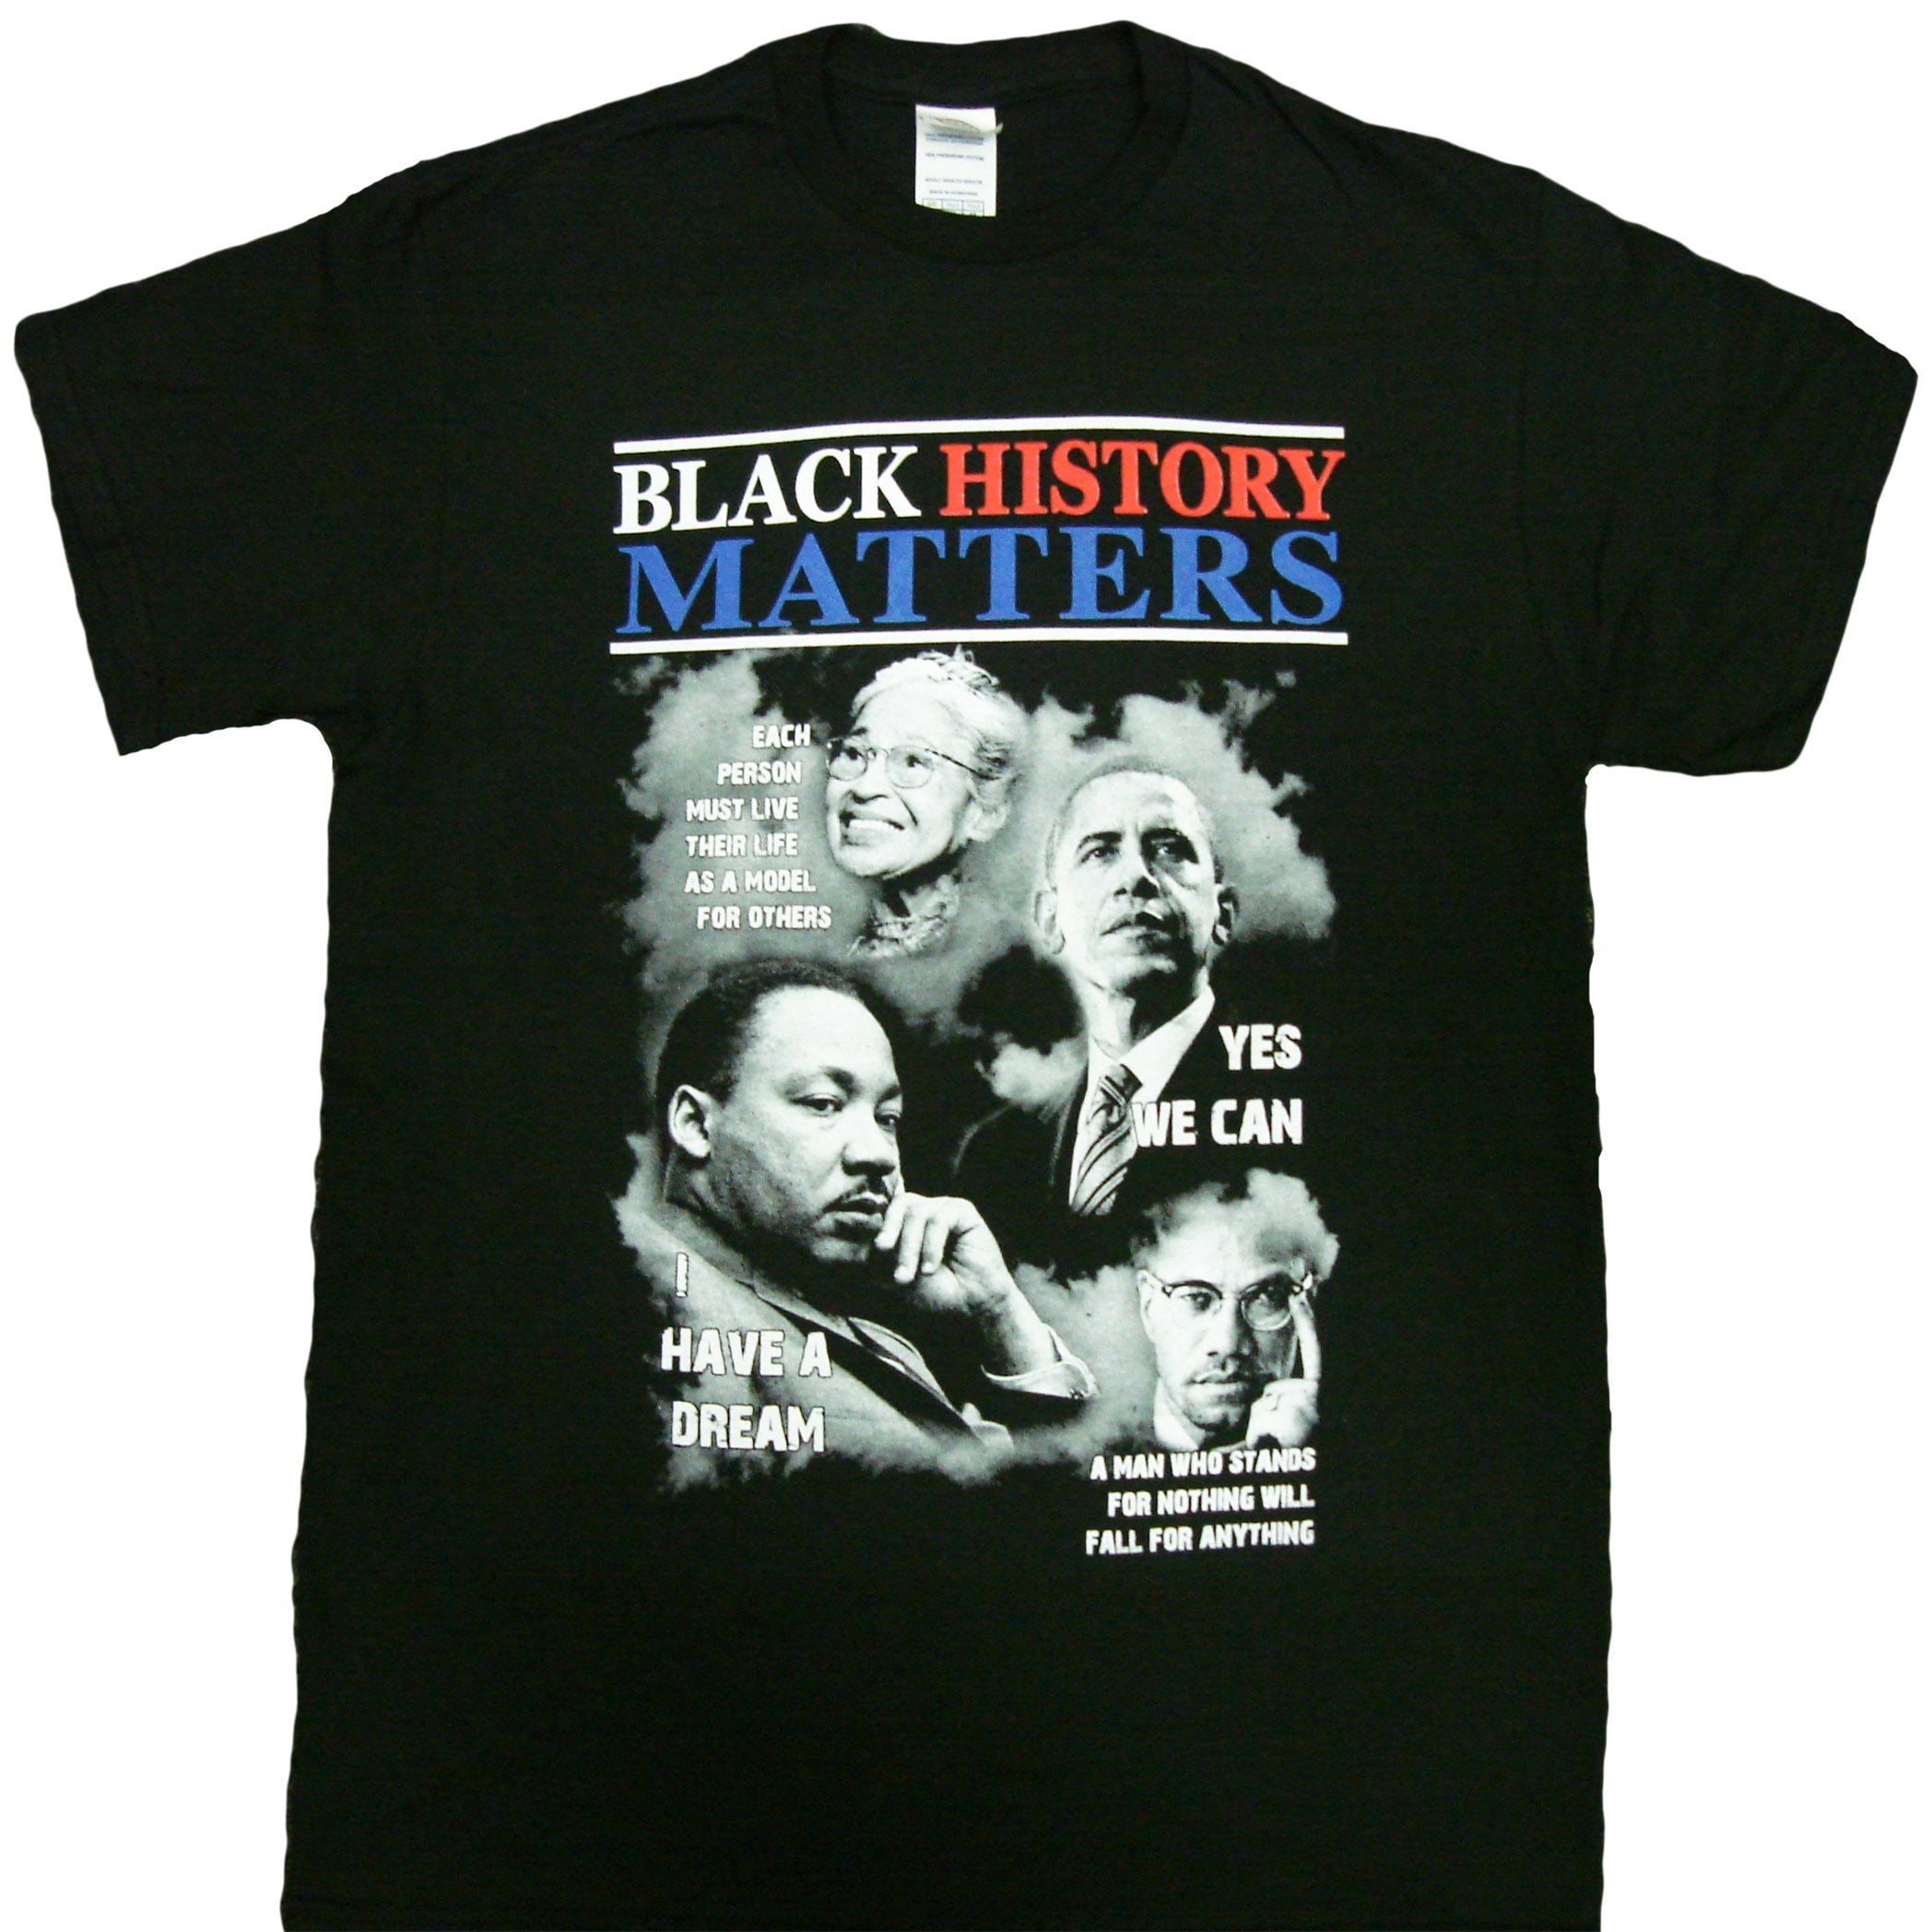 400 Years in America Ladies' and Youth Sizes Men's Black History Month Tee 